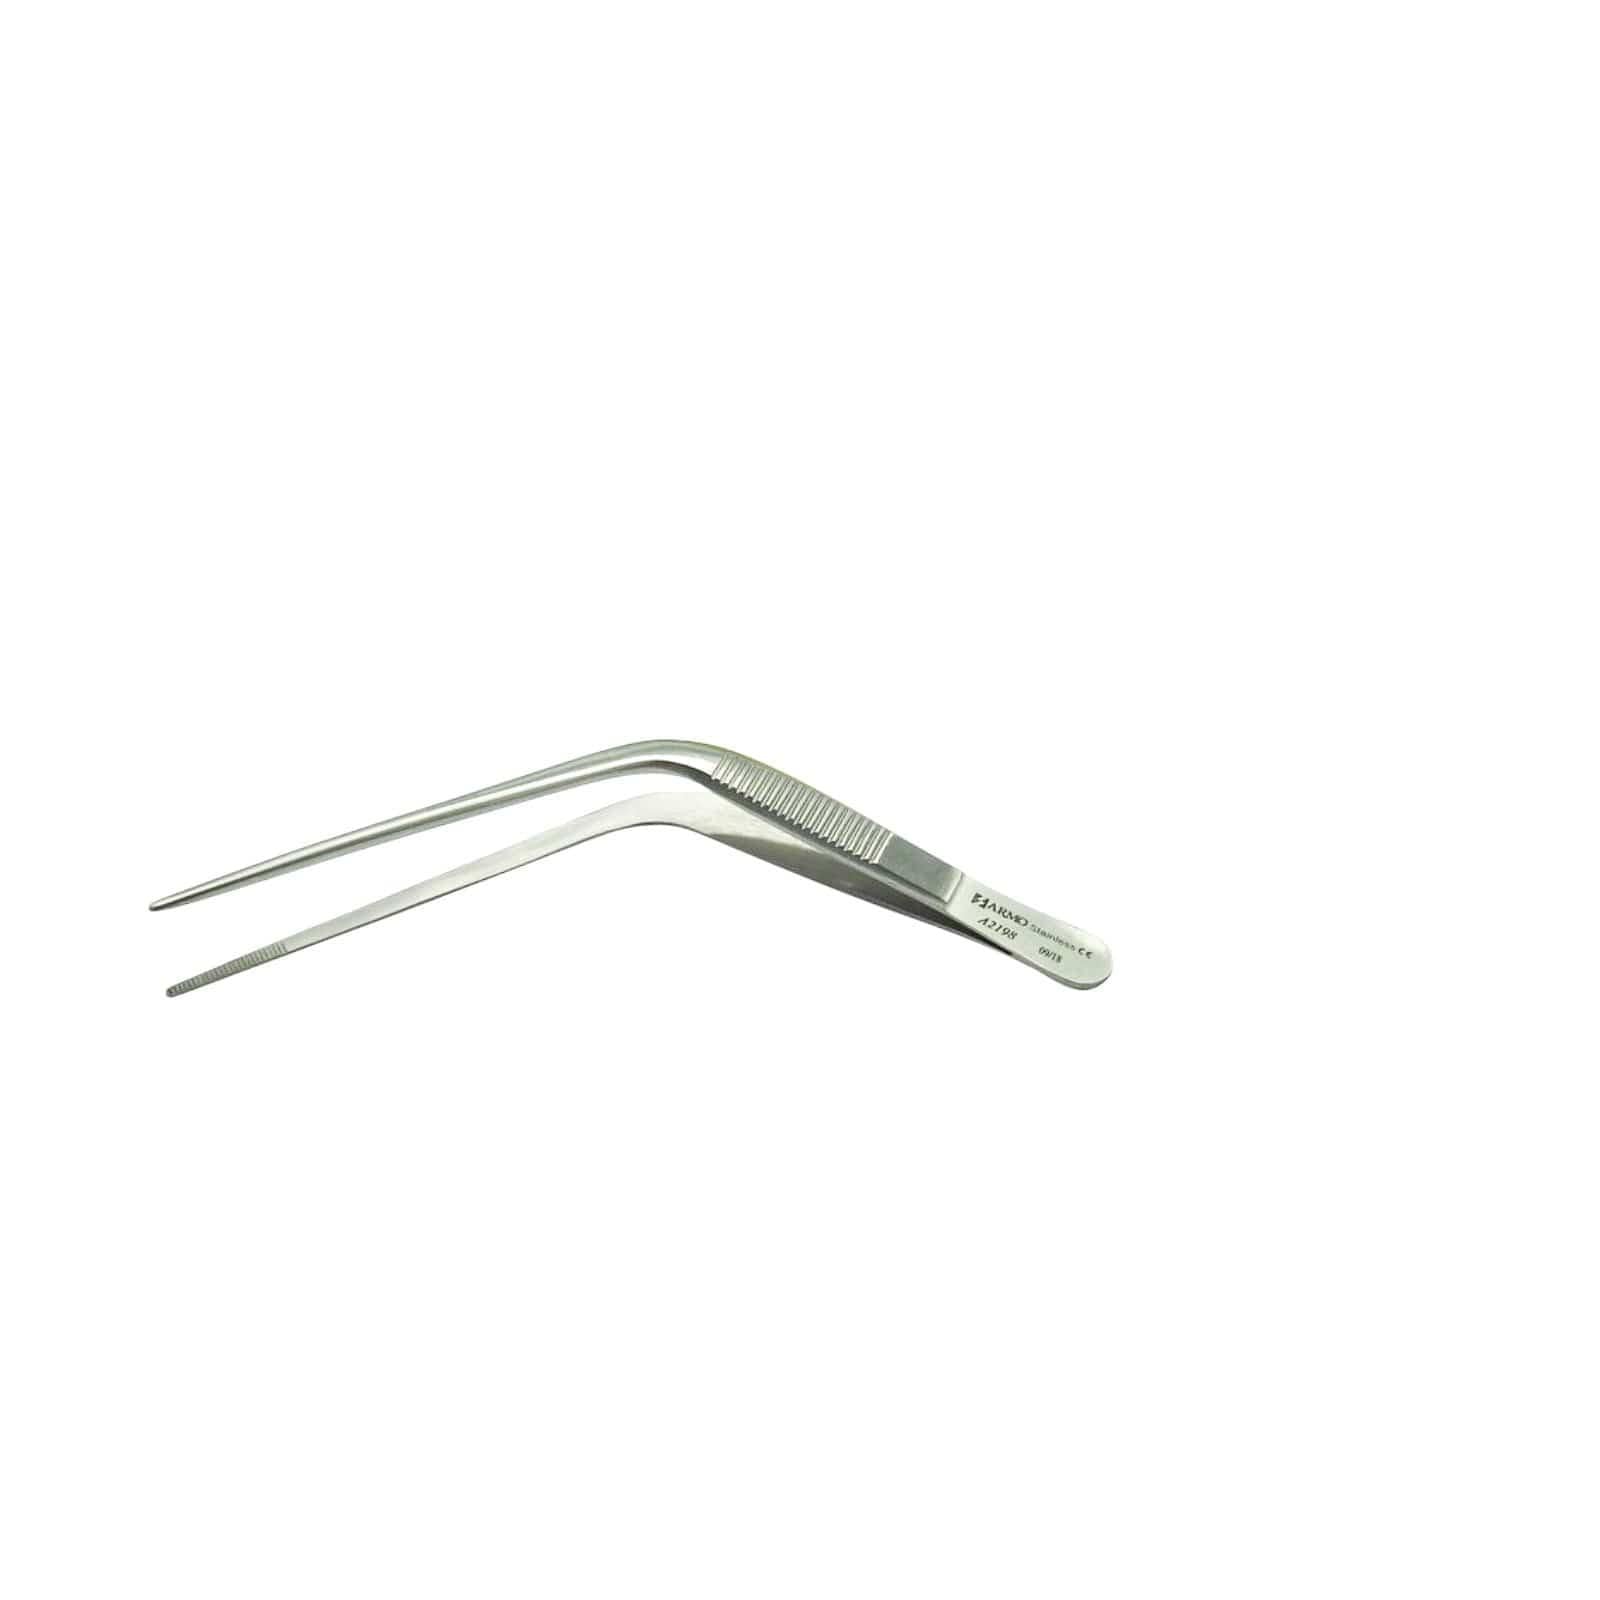 Armo Surgical Instruments 13cm Armo Troeltsch Forceps